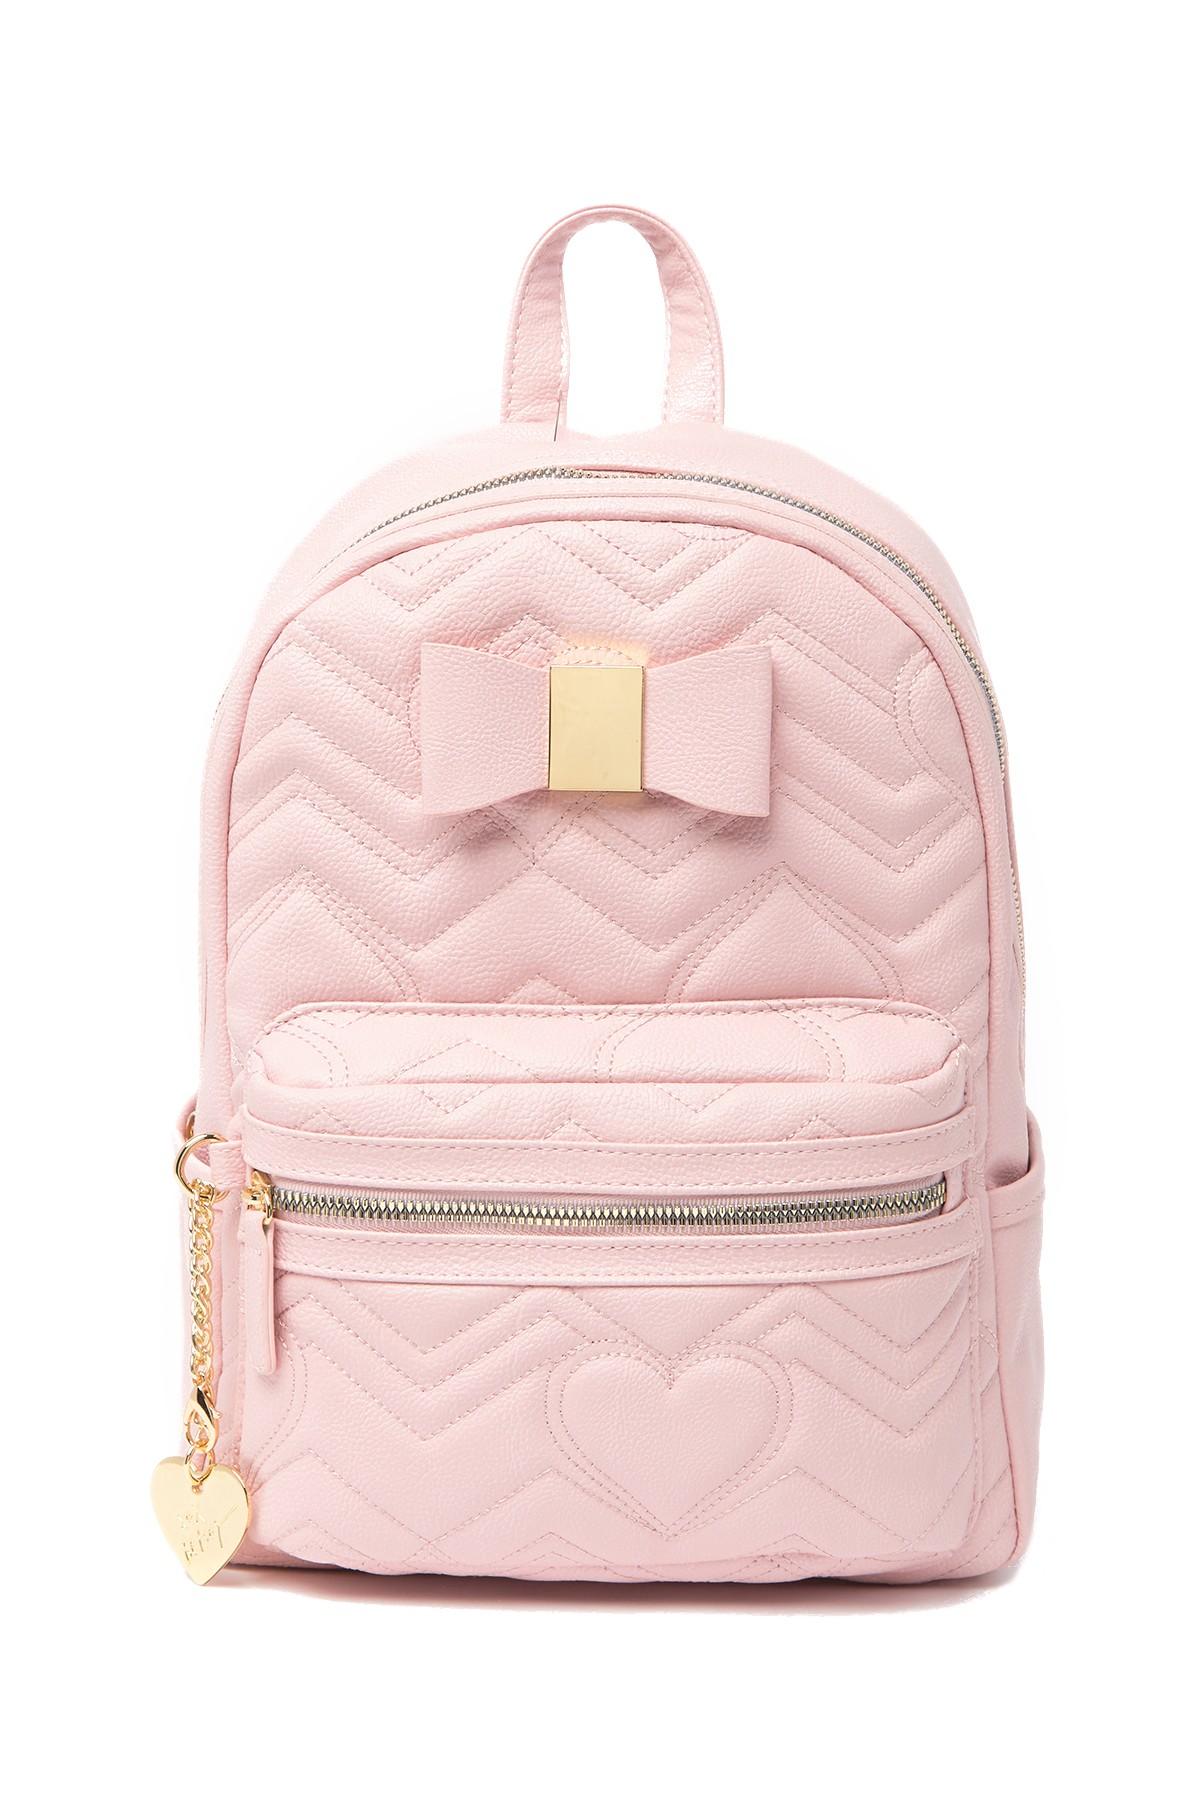 Betsey Johnson Synthetic Quilted Heart Mini Backpack in Blush (Pink) - Lyst